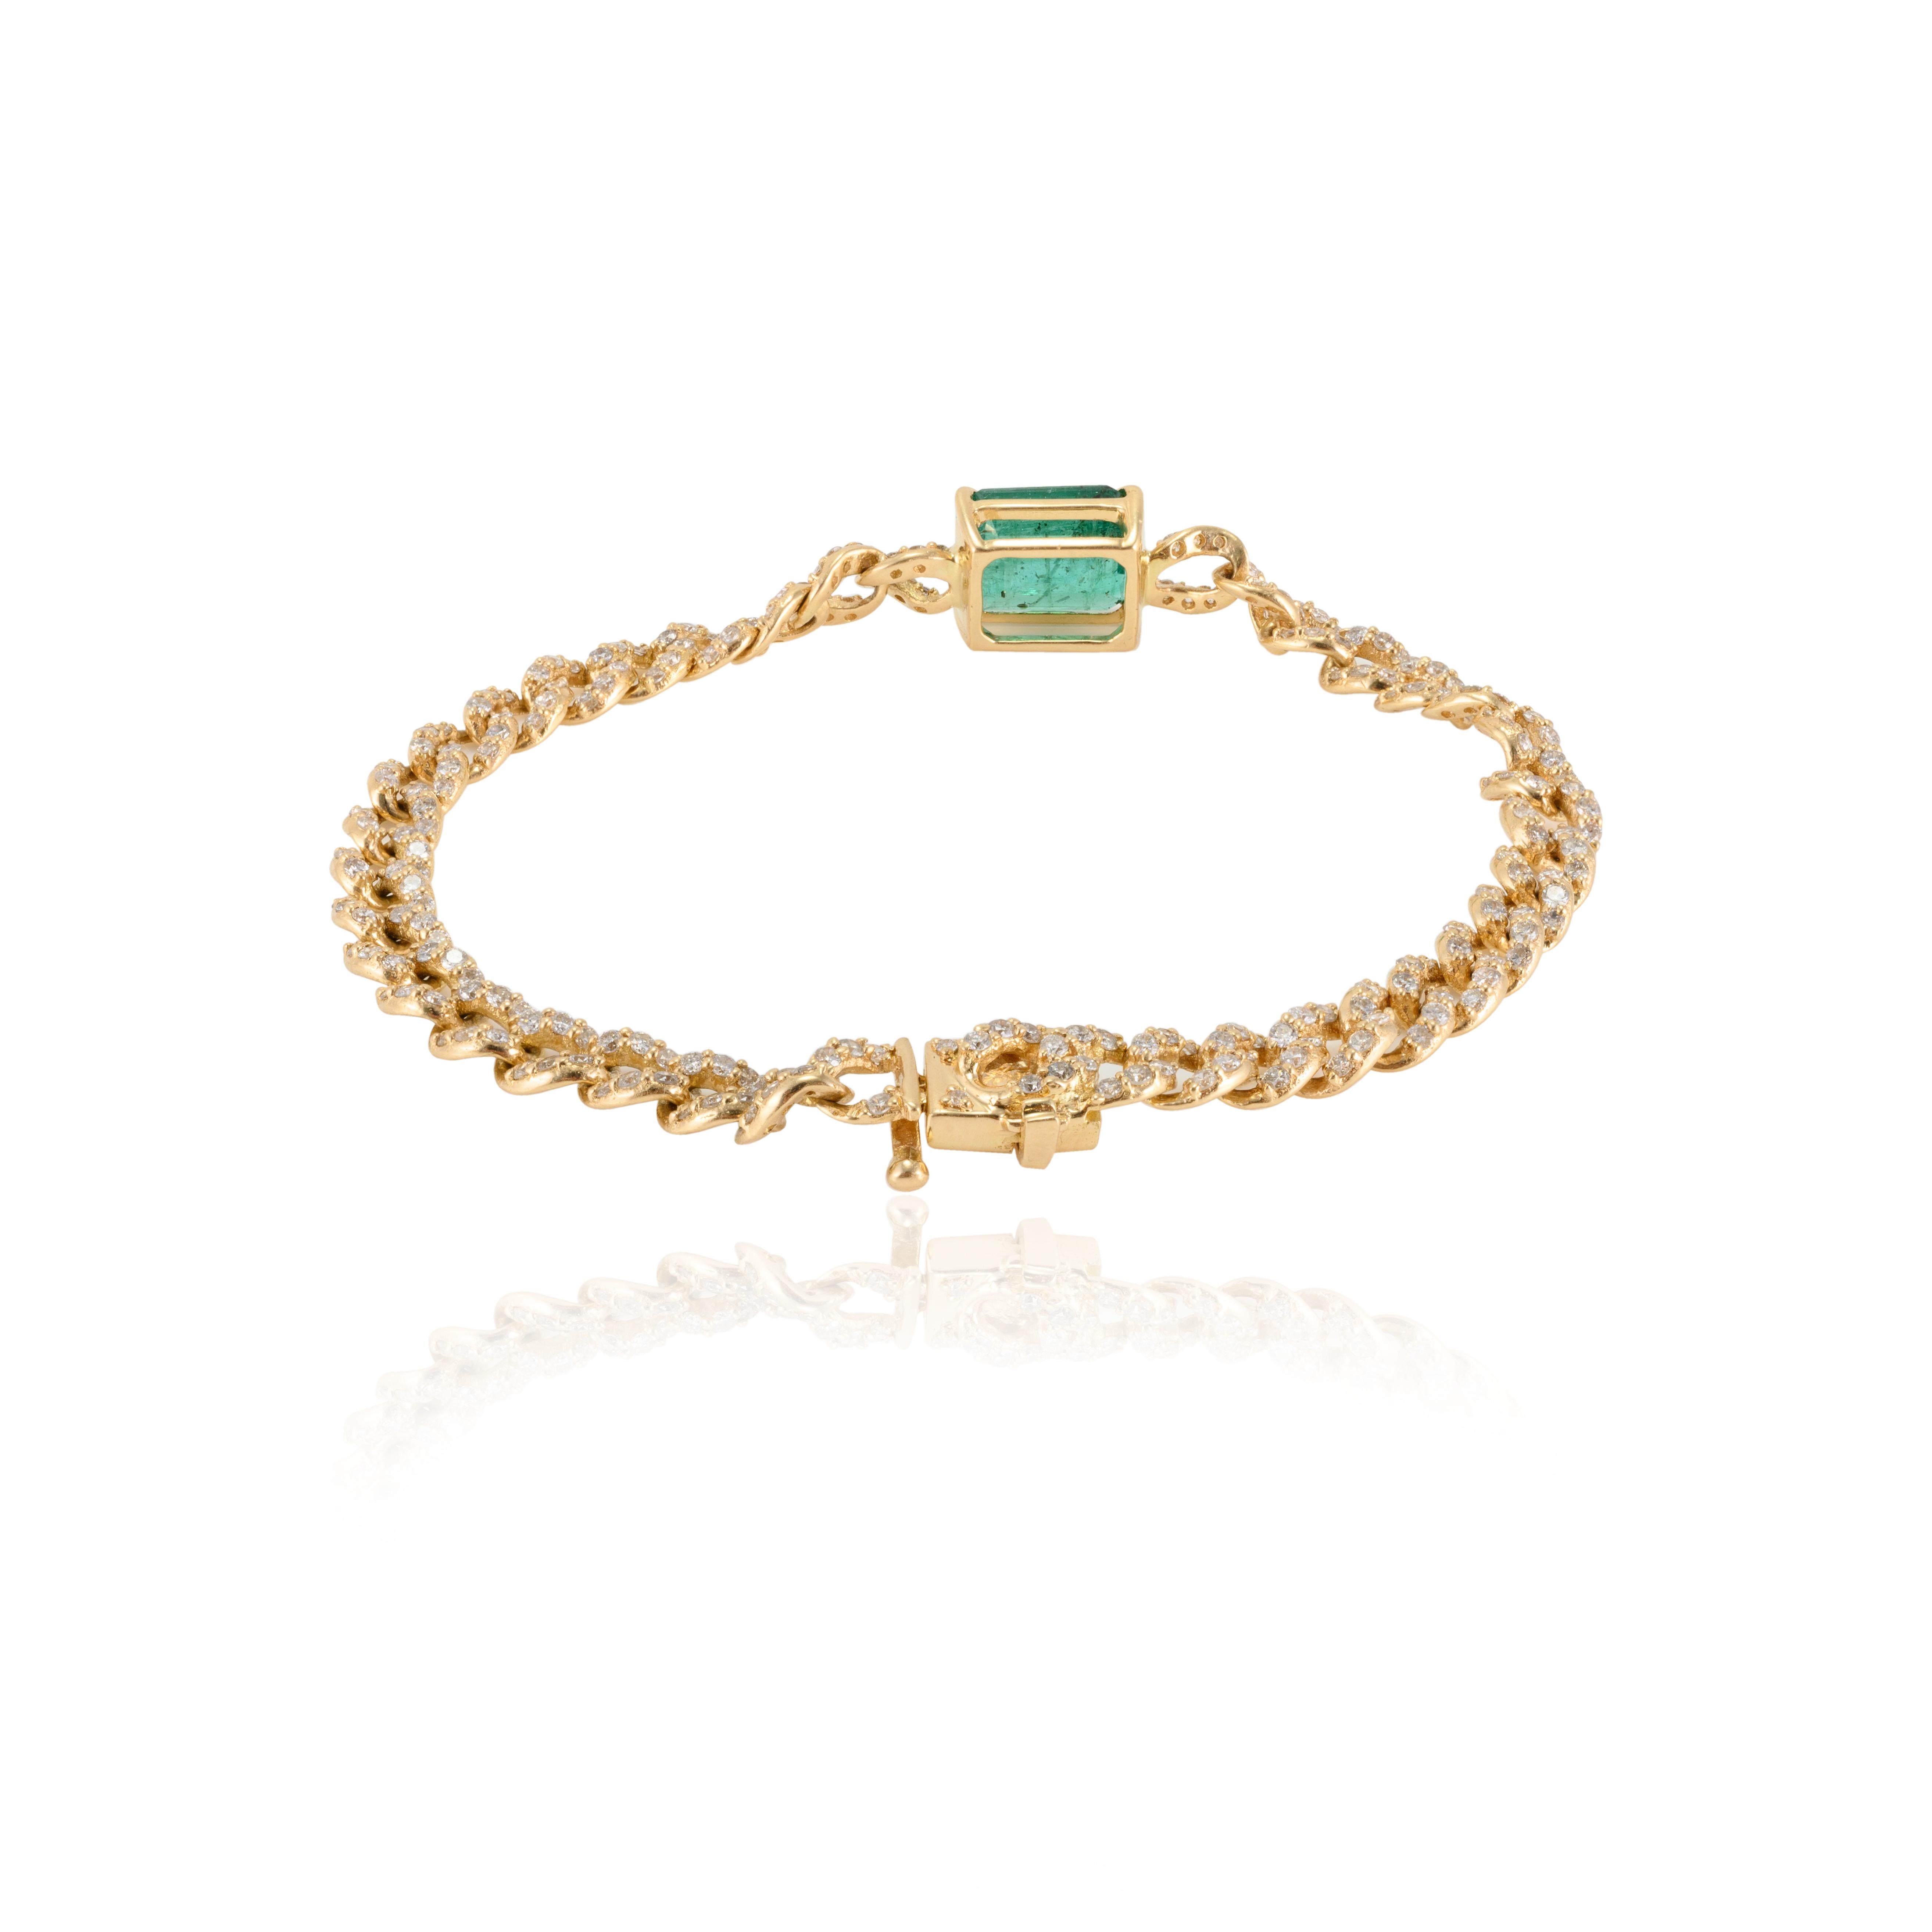 Statement Emerald Diamond Chain Bracelet in 18k Solid Yellow Gold In New Condition For Sale In Houston, TX